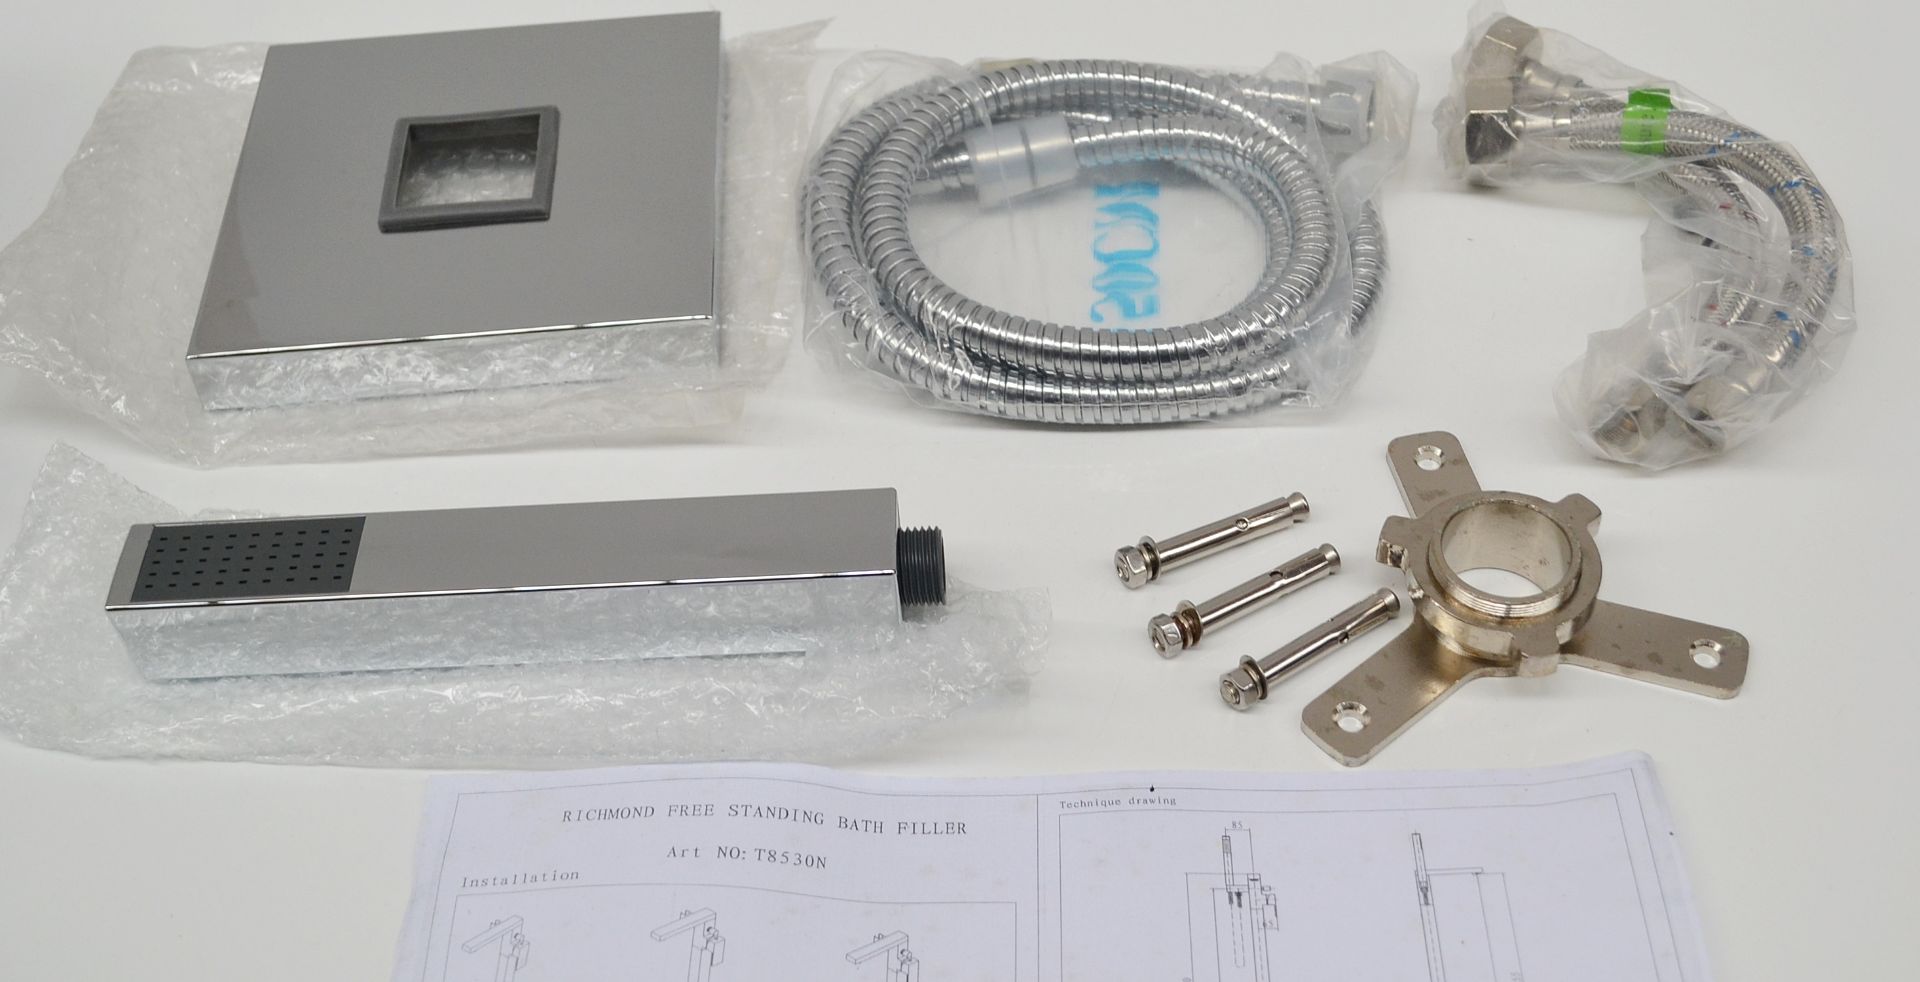 1 x Richmond Freestanding Bath Filler Tap In Chrome - Ref: MBI002 - CL190 - Unused Boxed Stock - - Image 7 of 8